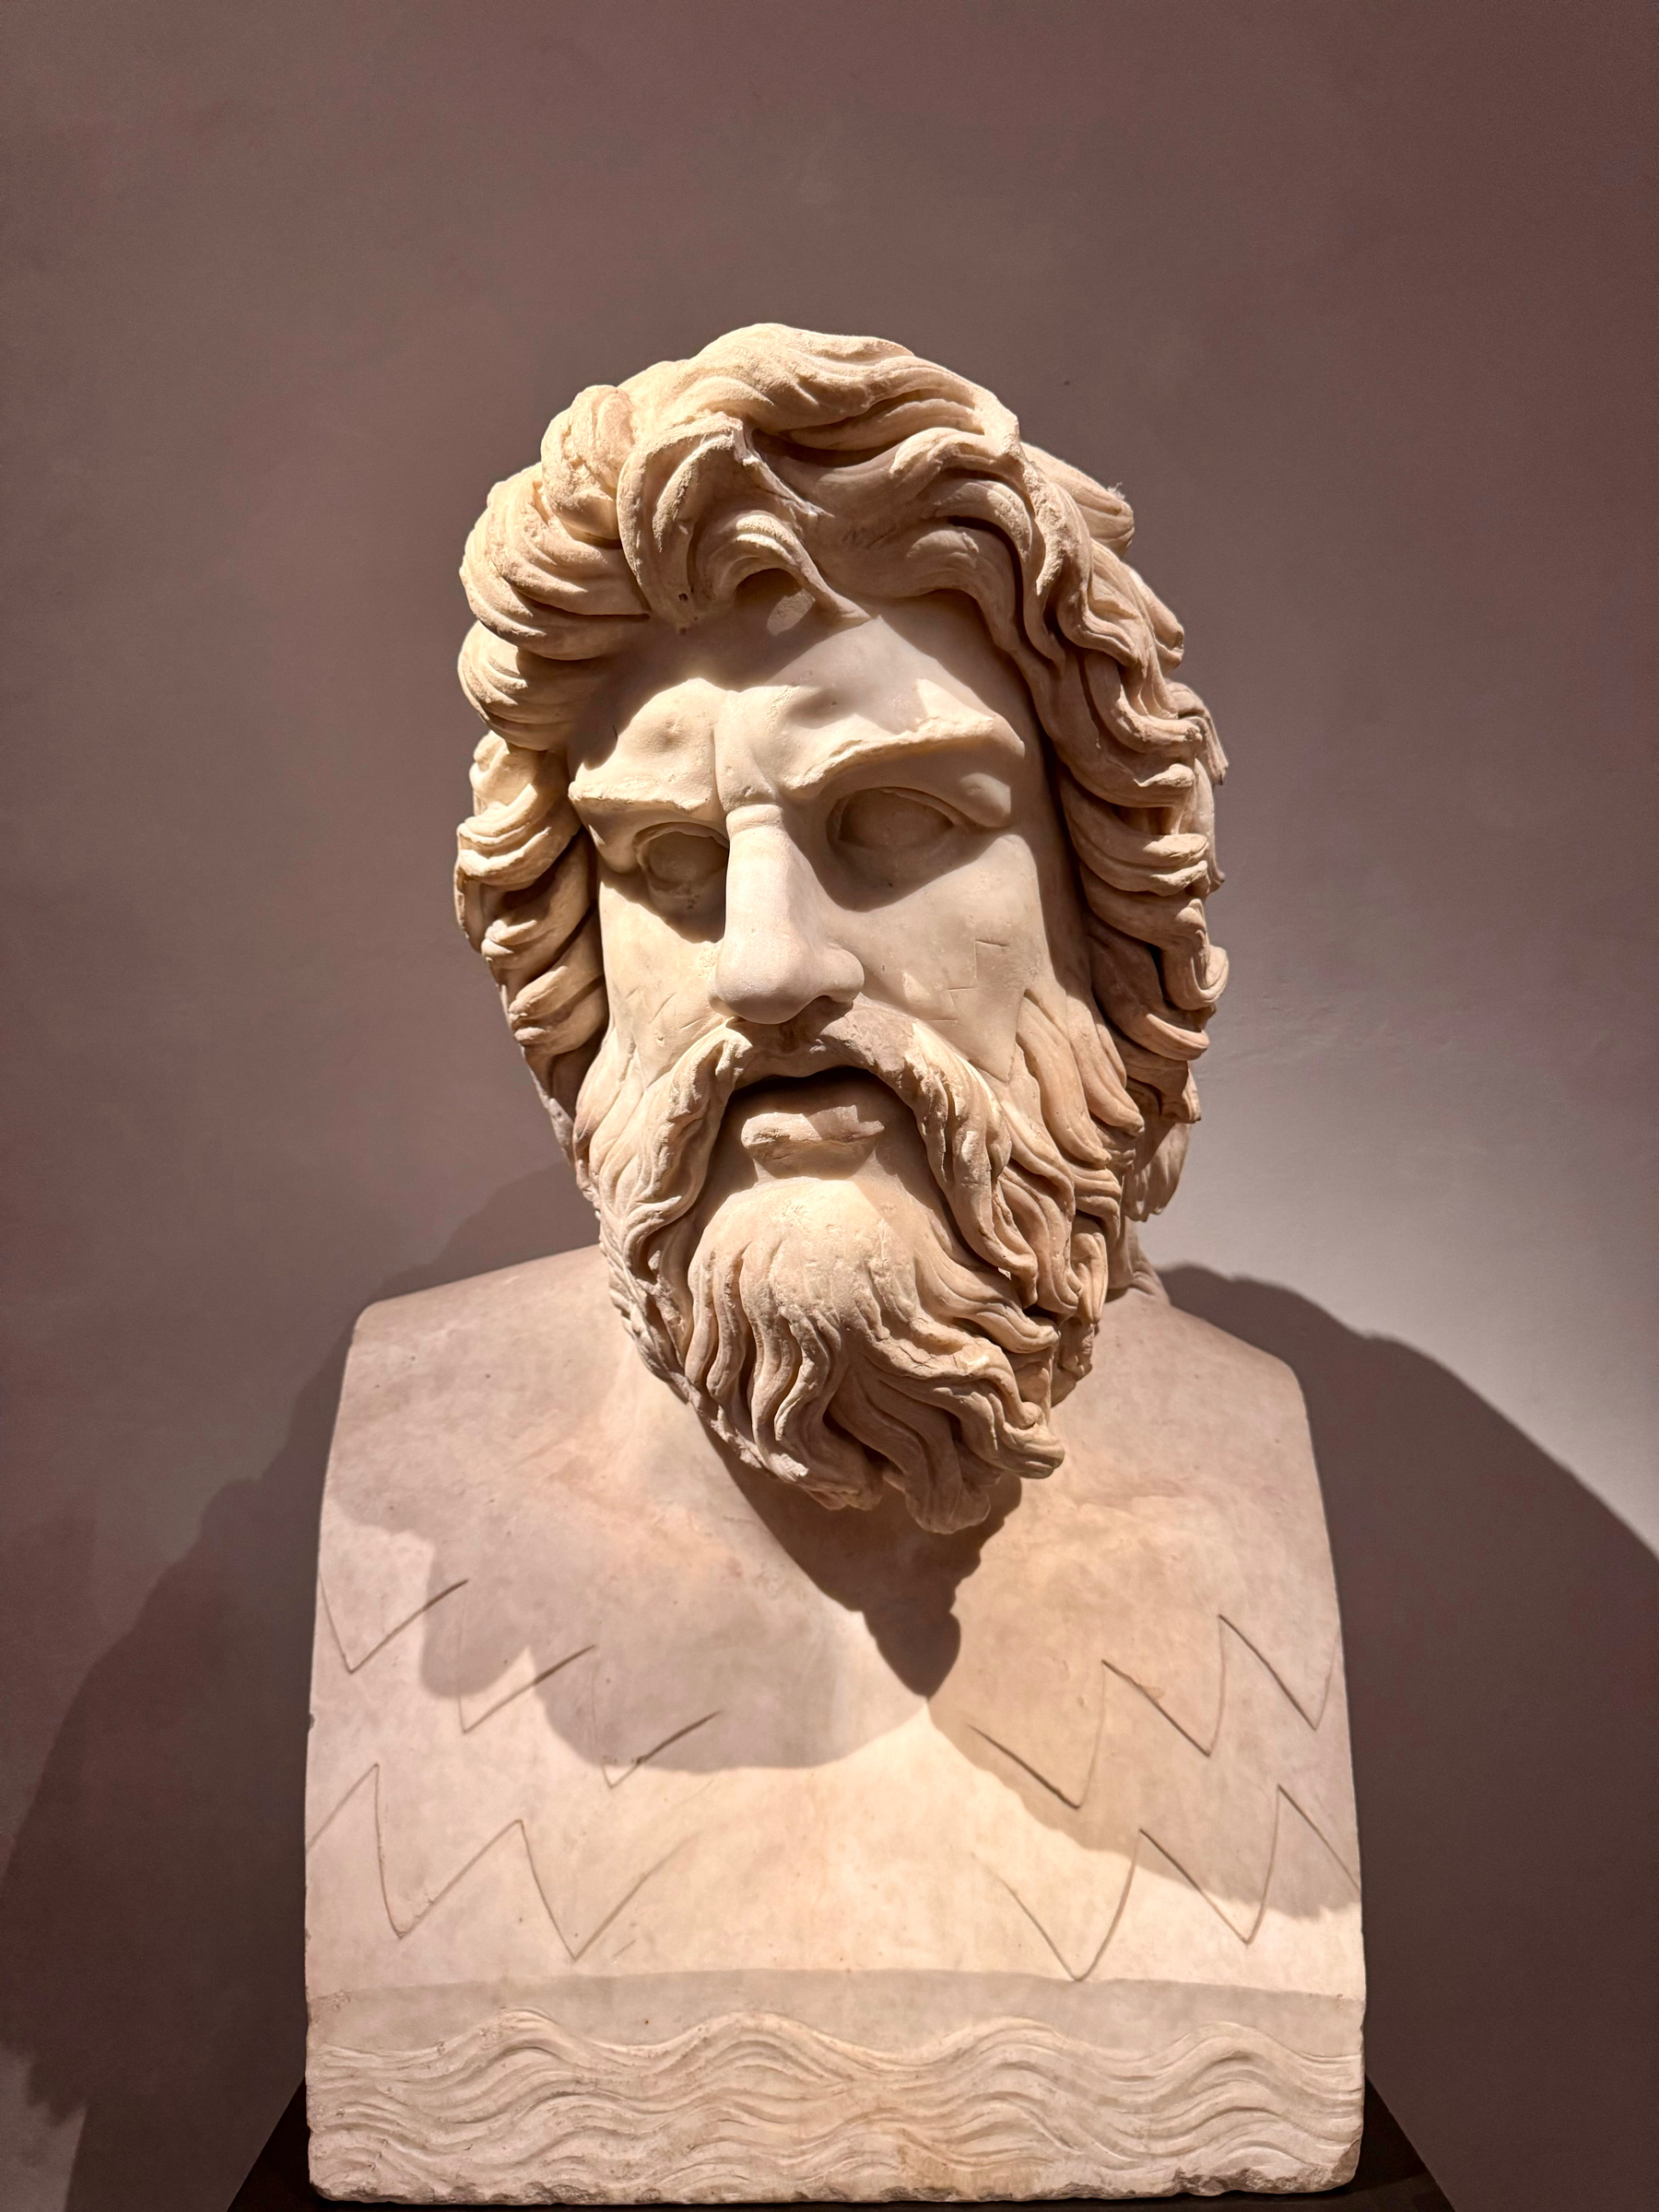 A marble bust of a bearded man with flowing hair, depicted with a stern expression. Carved waves and zig-zag patterns are present on the bust’s base. The sculpture is set against a plain background.